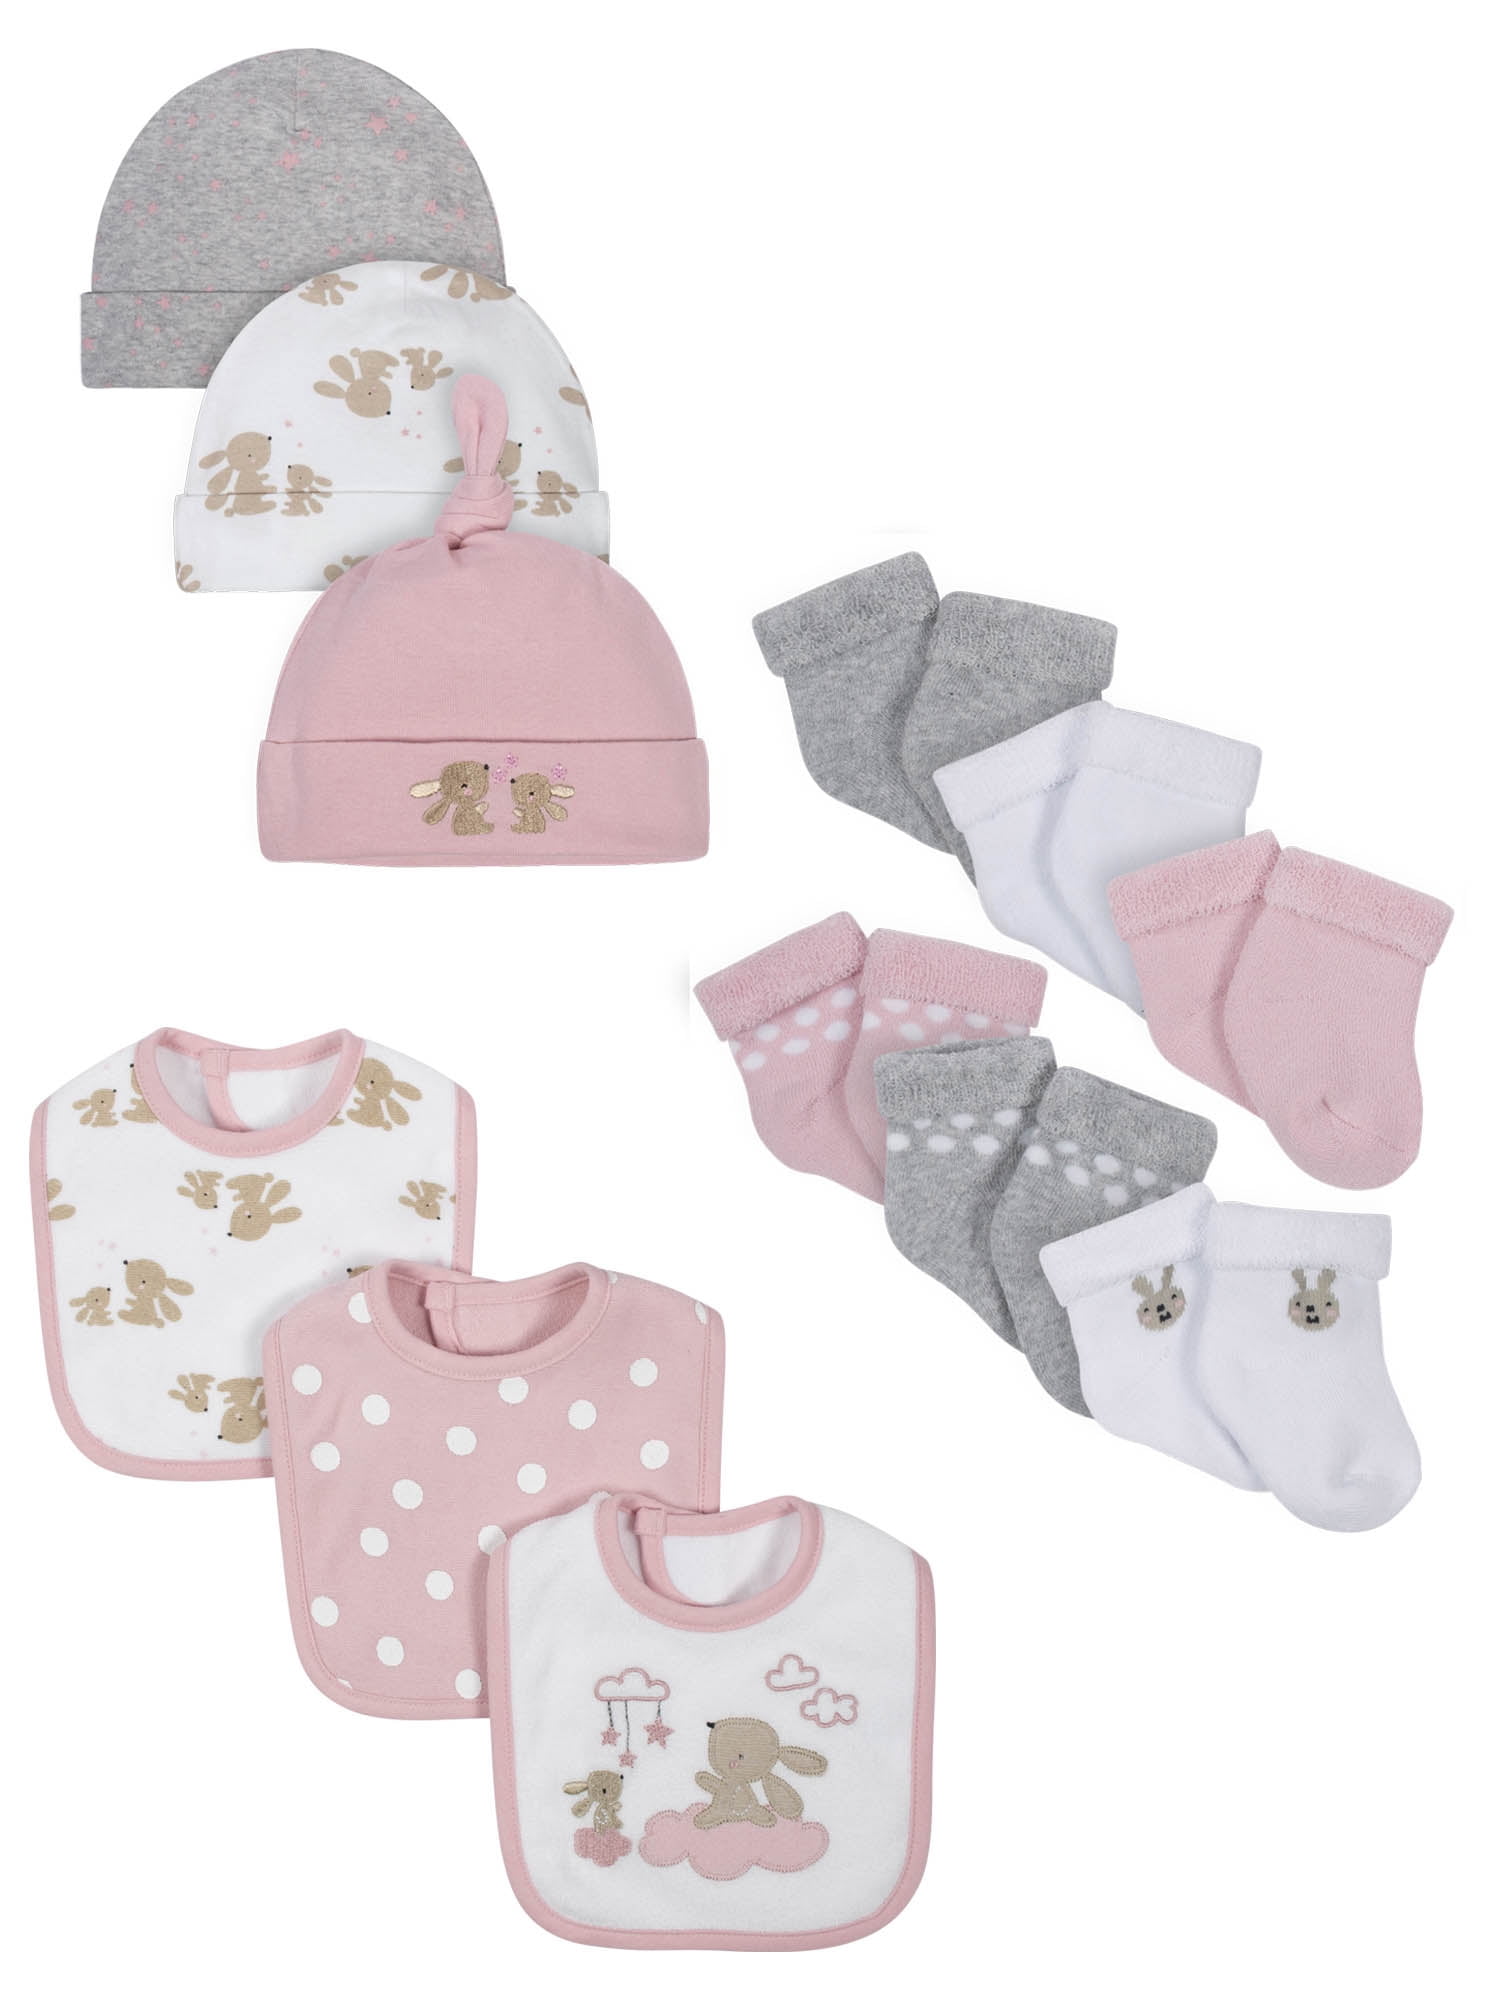 4-Piece Baby Bodysuit And Accessory Set bear-themed Beenie Scratch Mittens Socks 